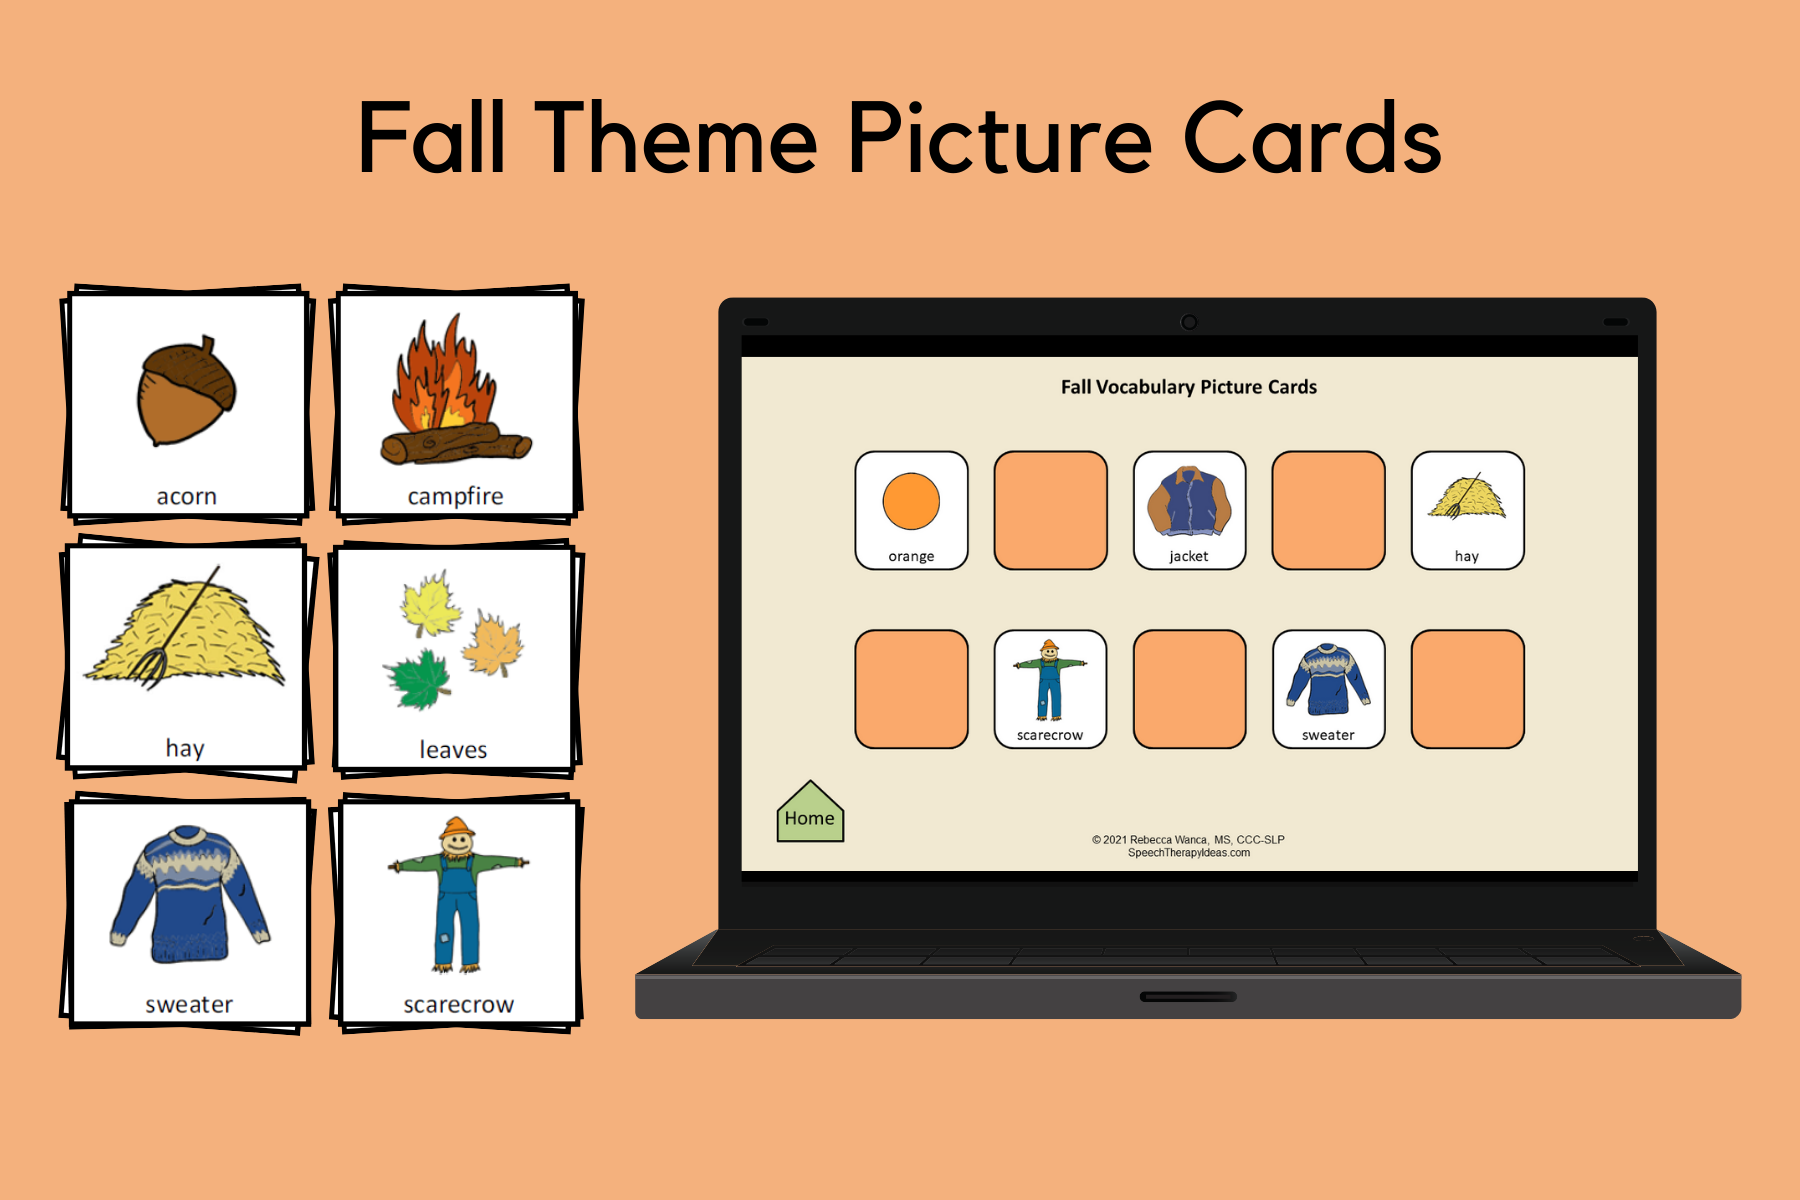 Fall Theme Picture Cards